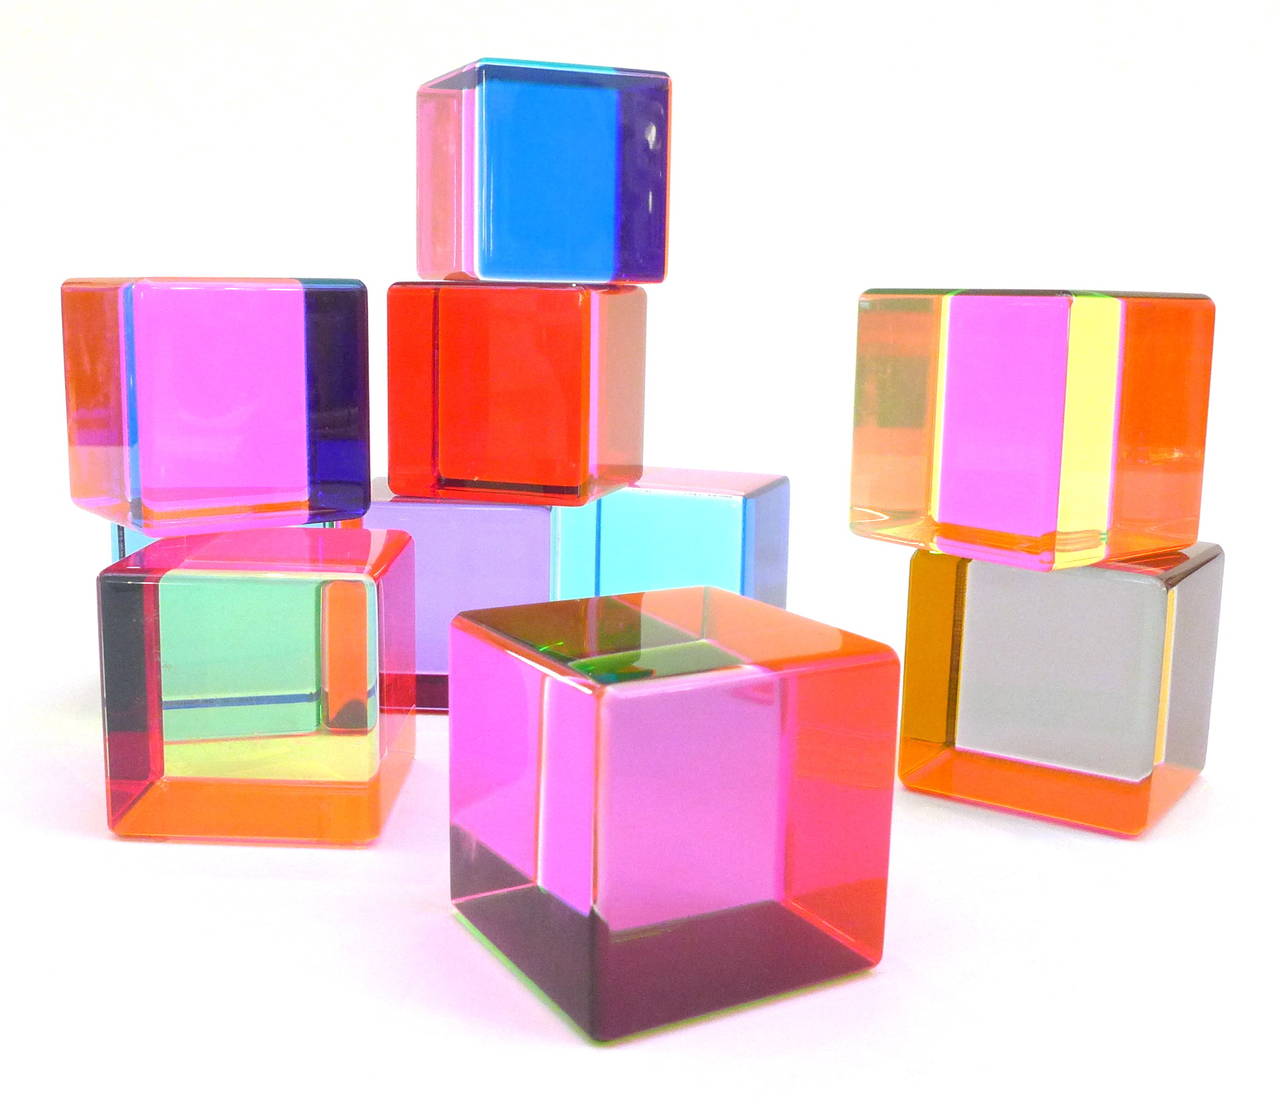 A terrific, vintage set of 10 colorful, laminated lucite cubes by celebrated Los-Angeles-based artist Vasa Mihich.  Brilliantly-hued, alluring and wonderfully playful objects that can be displayed in an endless variety of ways, changing color with a